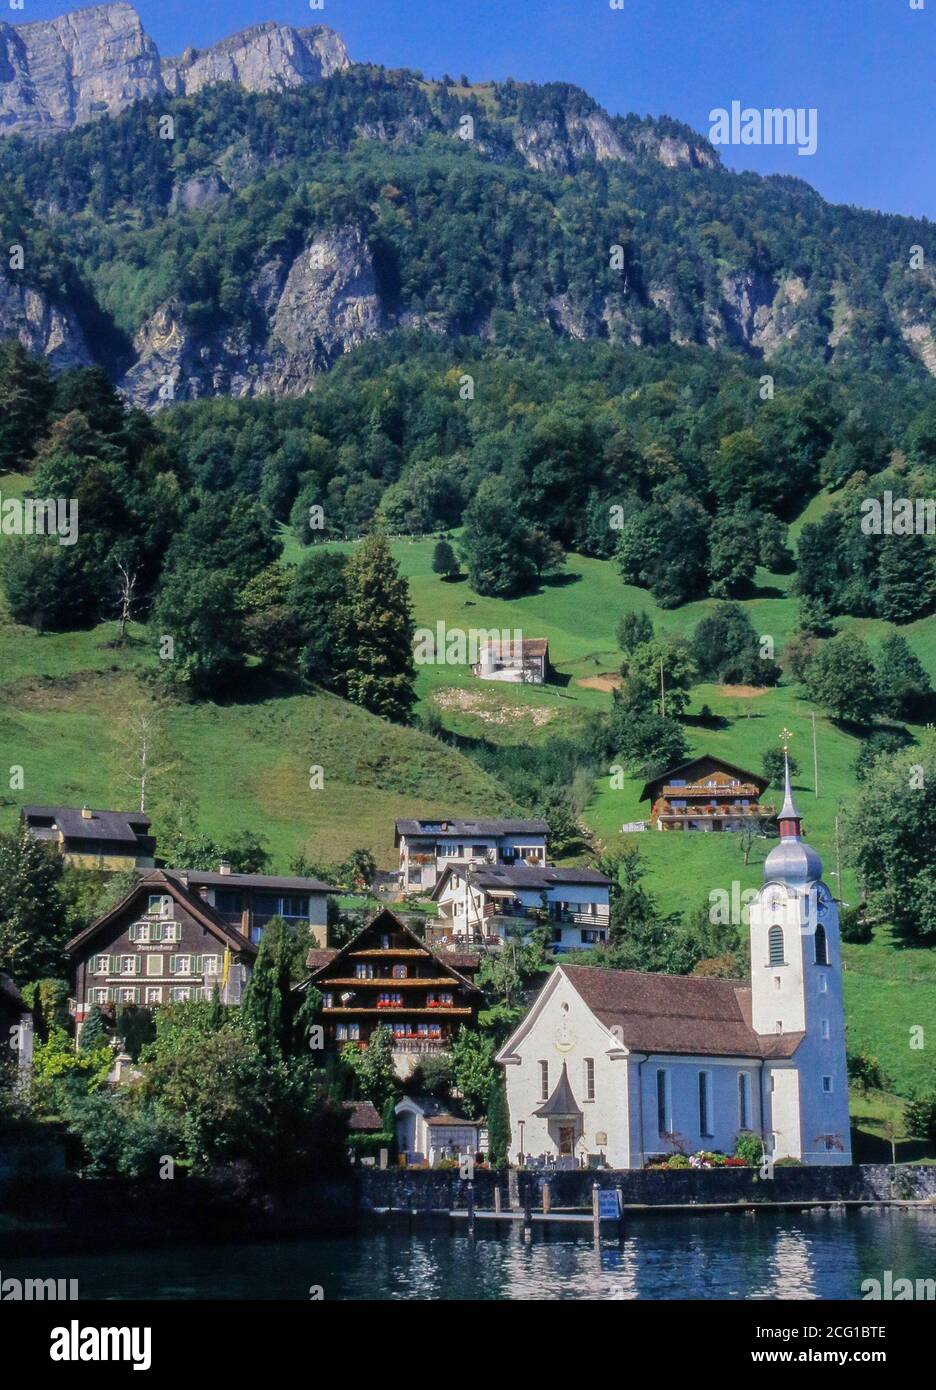 White village church of Saint Idda on shore of Lake Lucerne with mountain pastures and rocky outcrops in the background behind lakeside village Bauen, Stock Photo